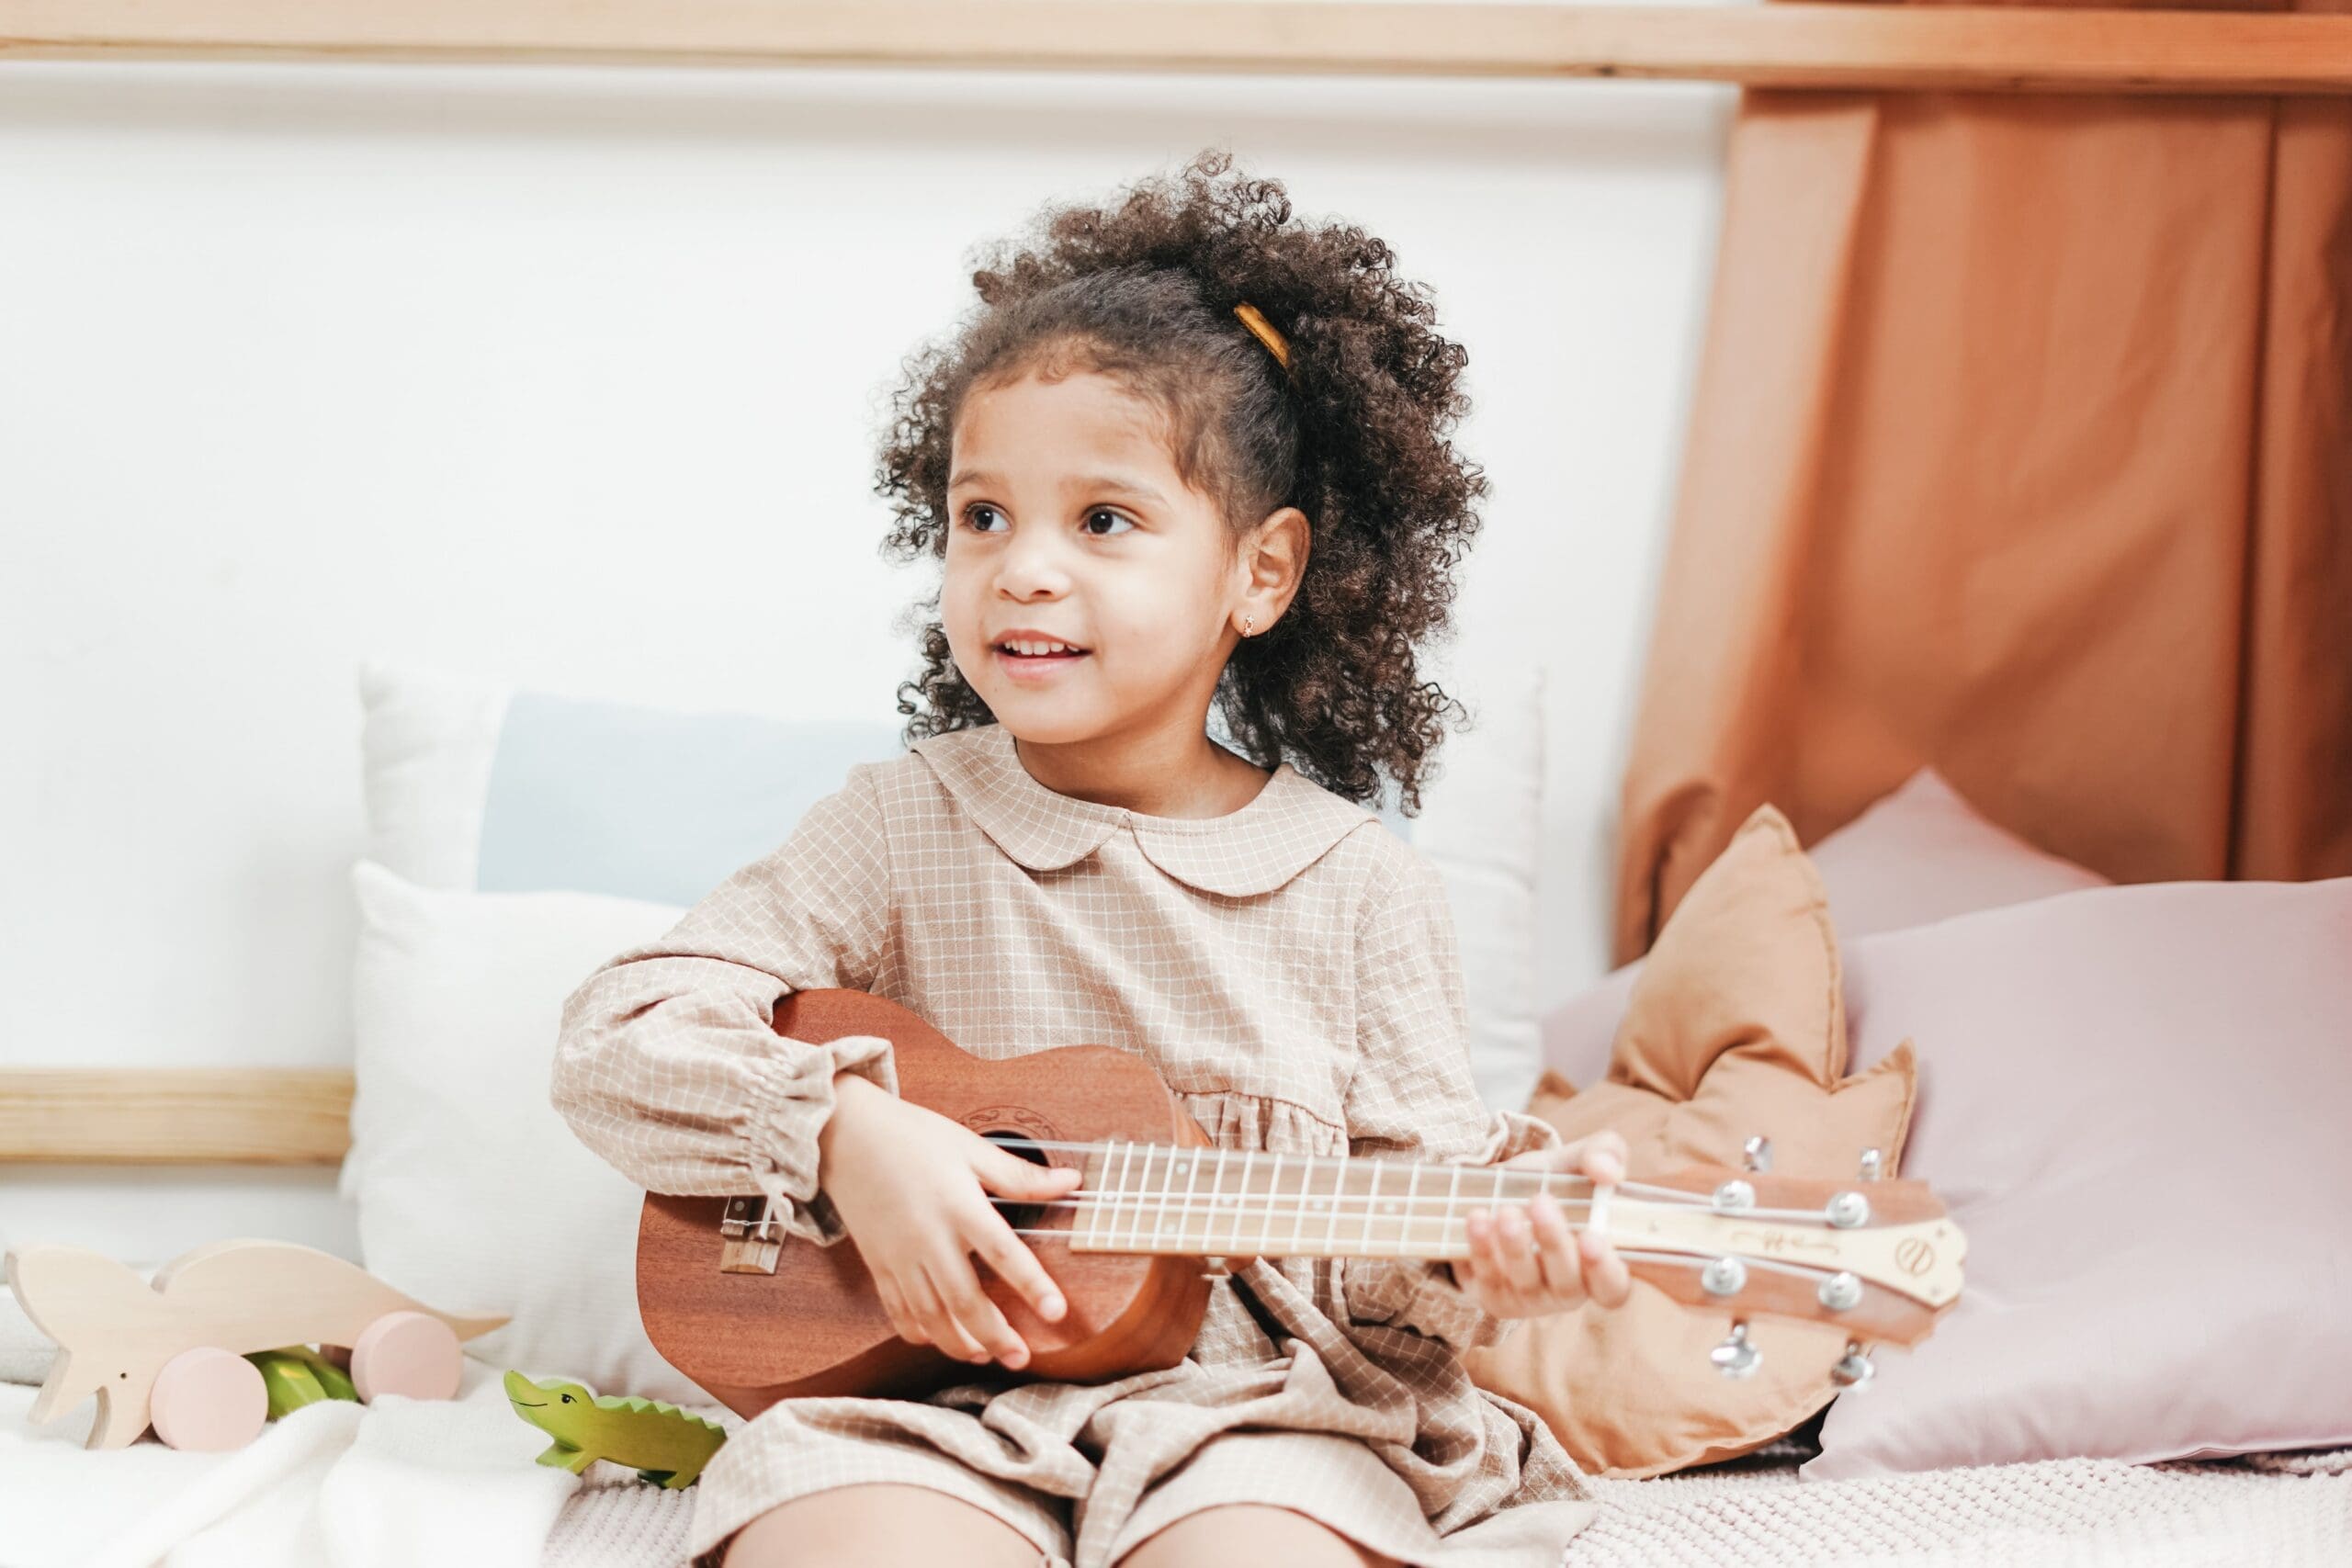 What are the Effects of Music on Child Development